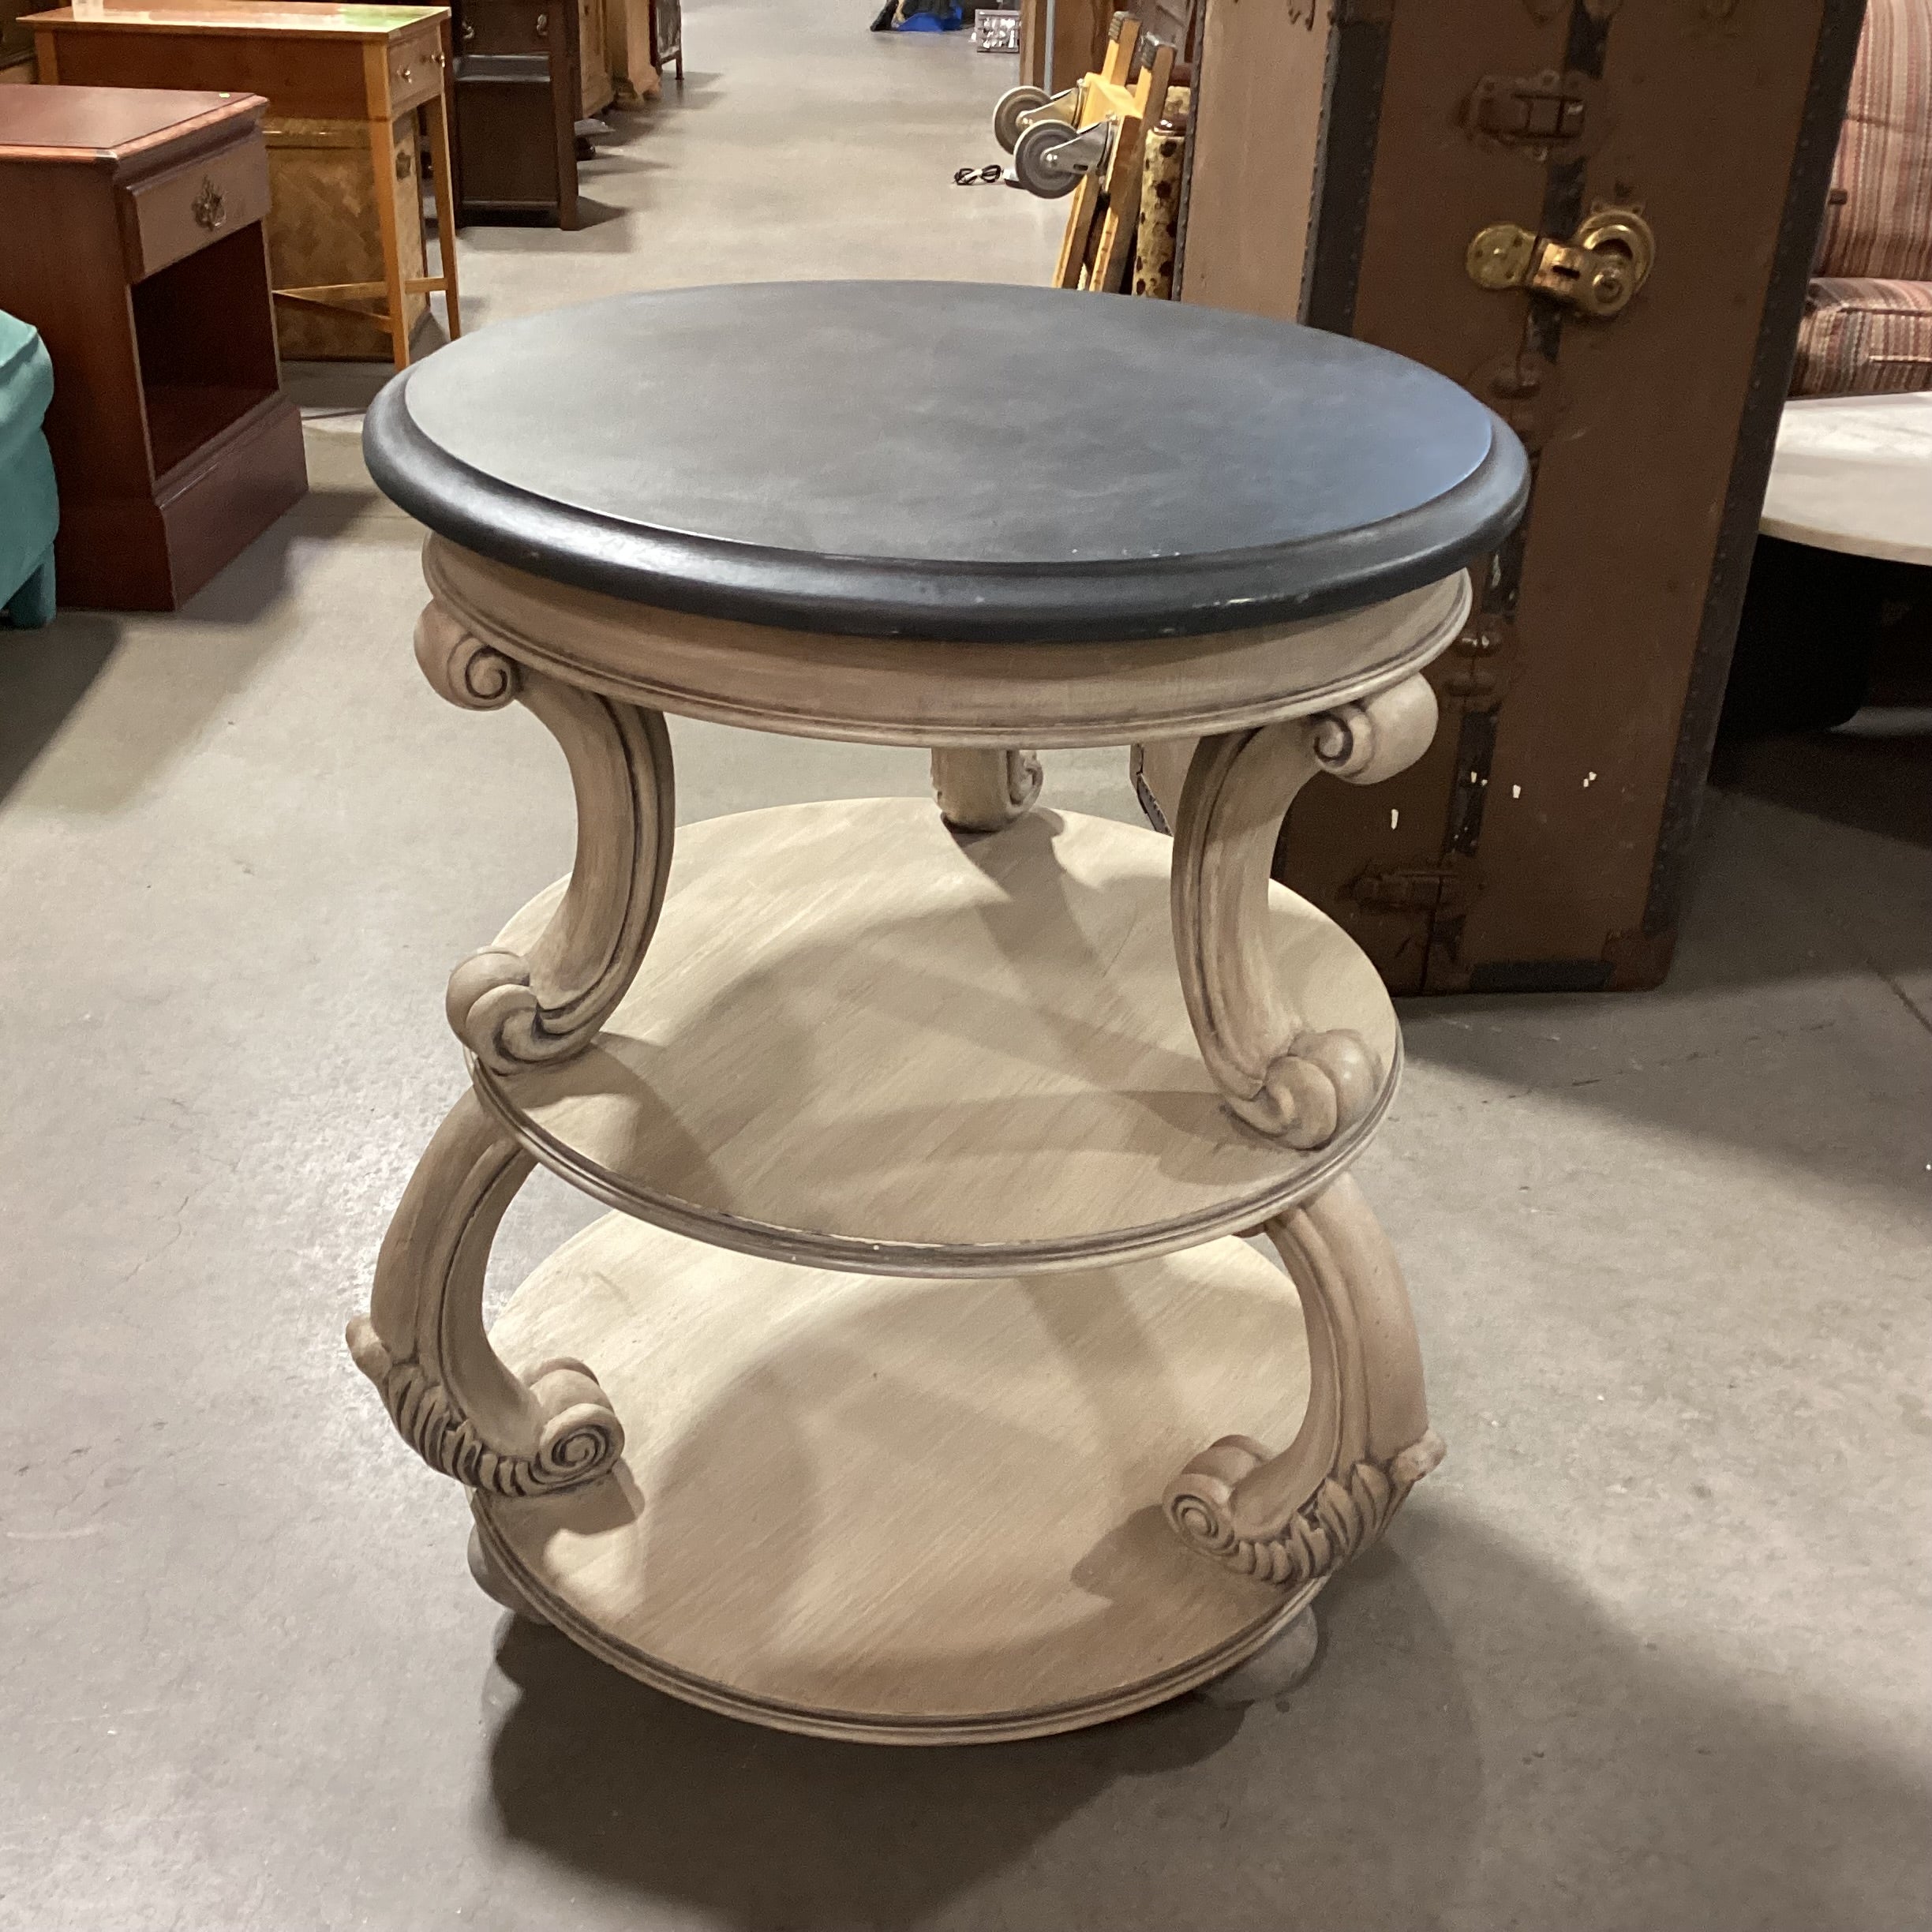 Cream & Charcoal Carved Wood 3 Tiered Accent Table 24" Diameter x 30"